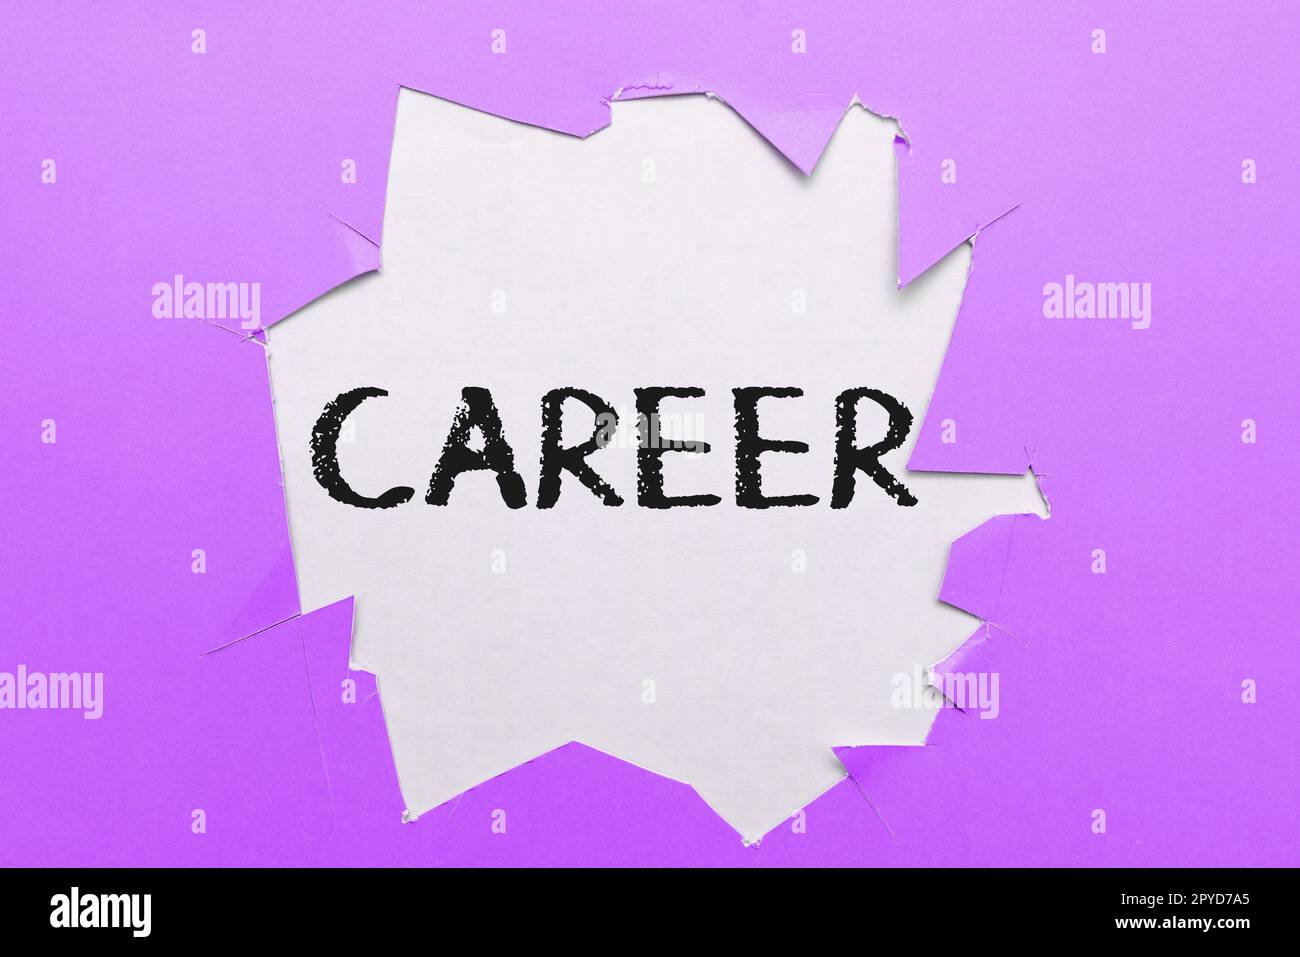 Sign displaying Career. Business overview undertaken for period persons life with opportunities for progress. Stock Photo